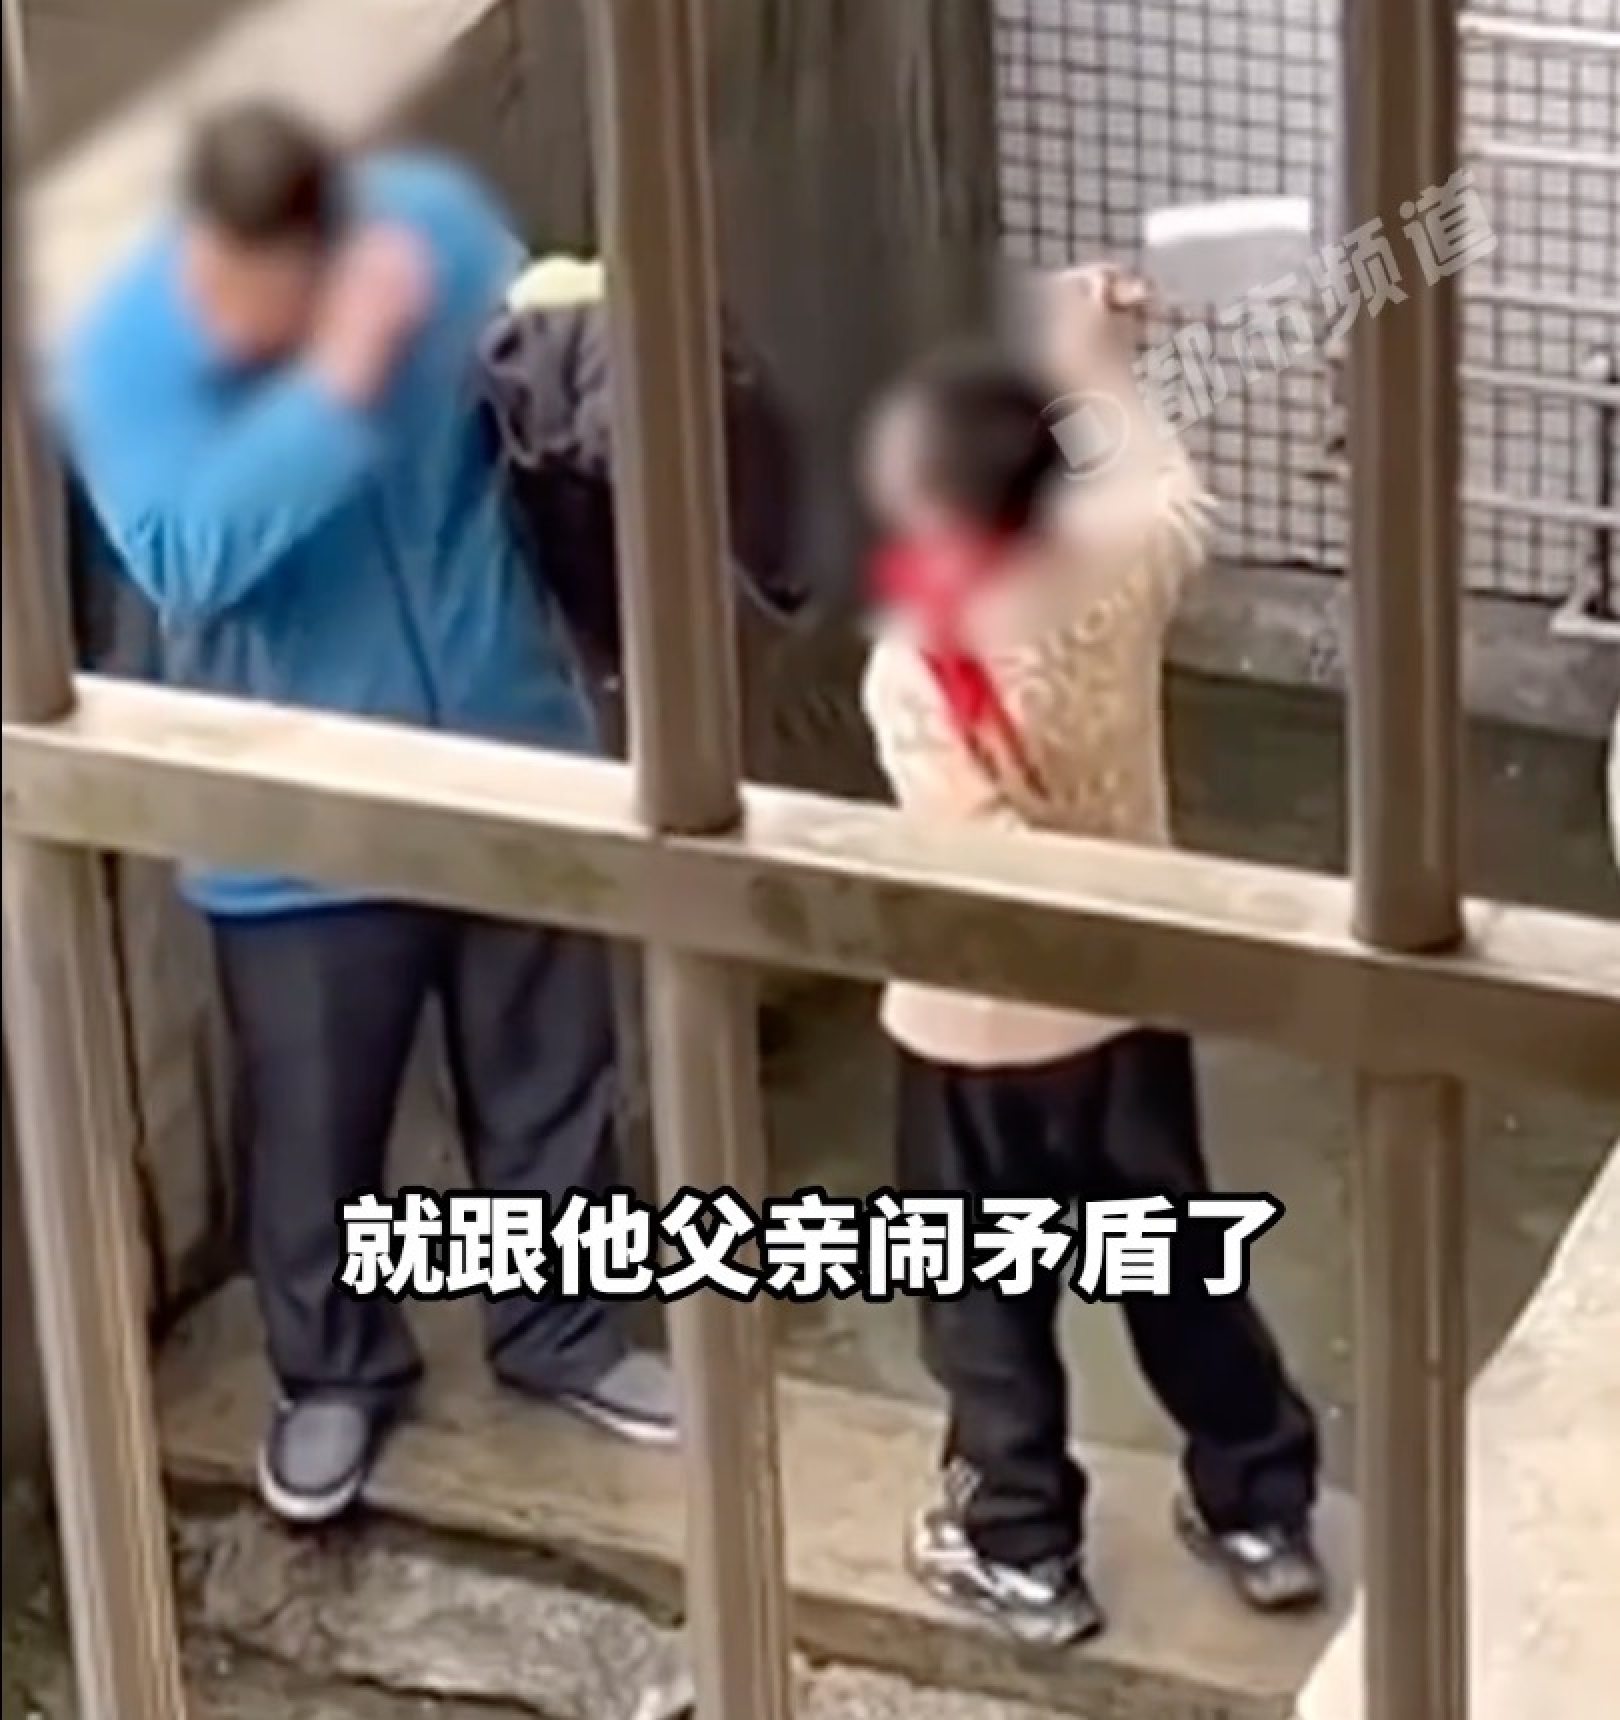 The shocking moment when the boy threatens his father with a meat cleaver. Photo: Weibo